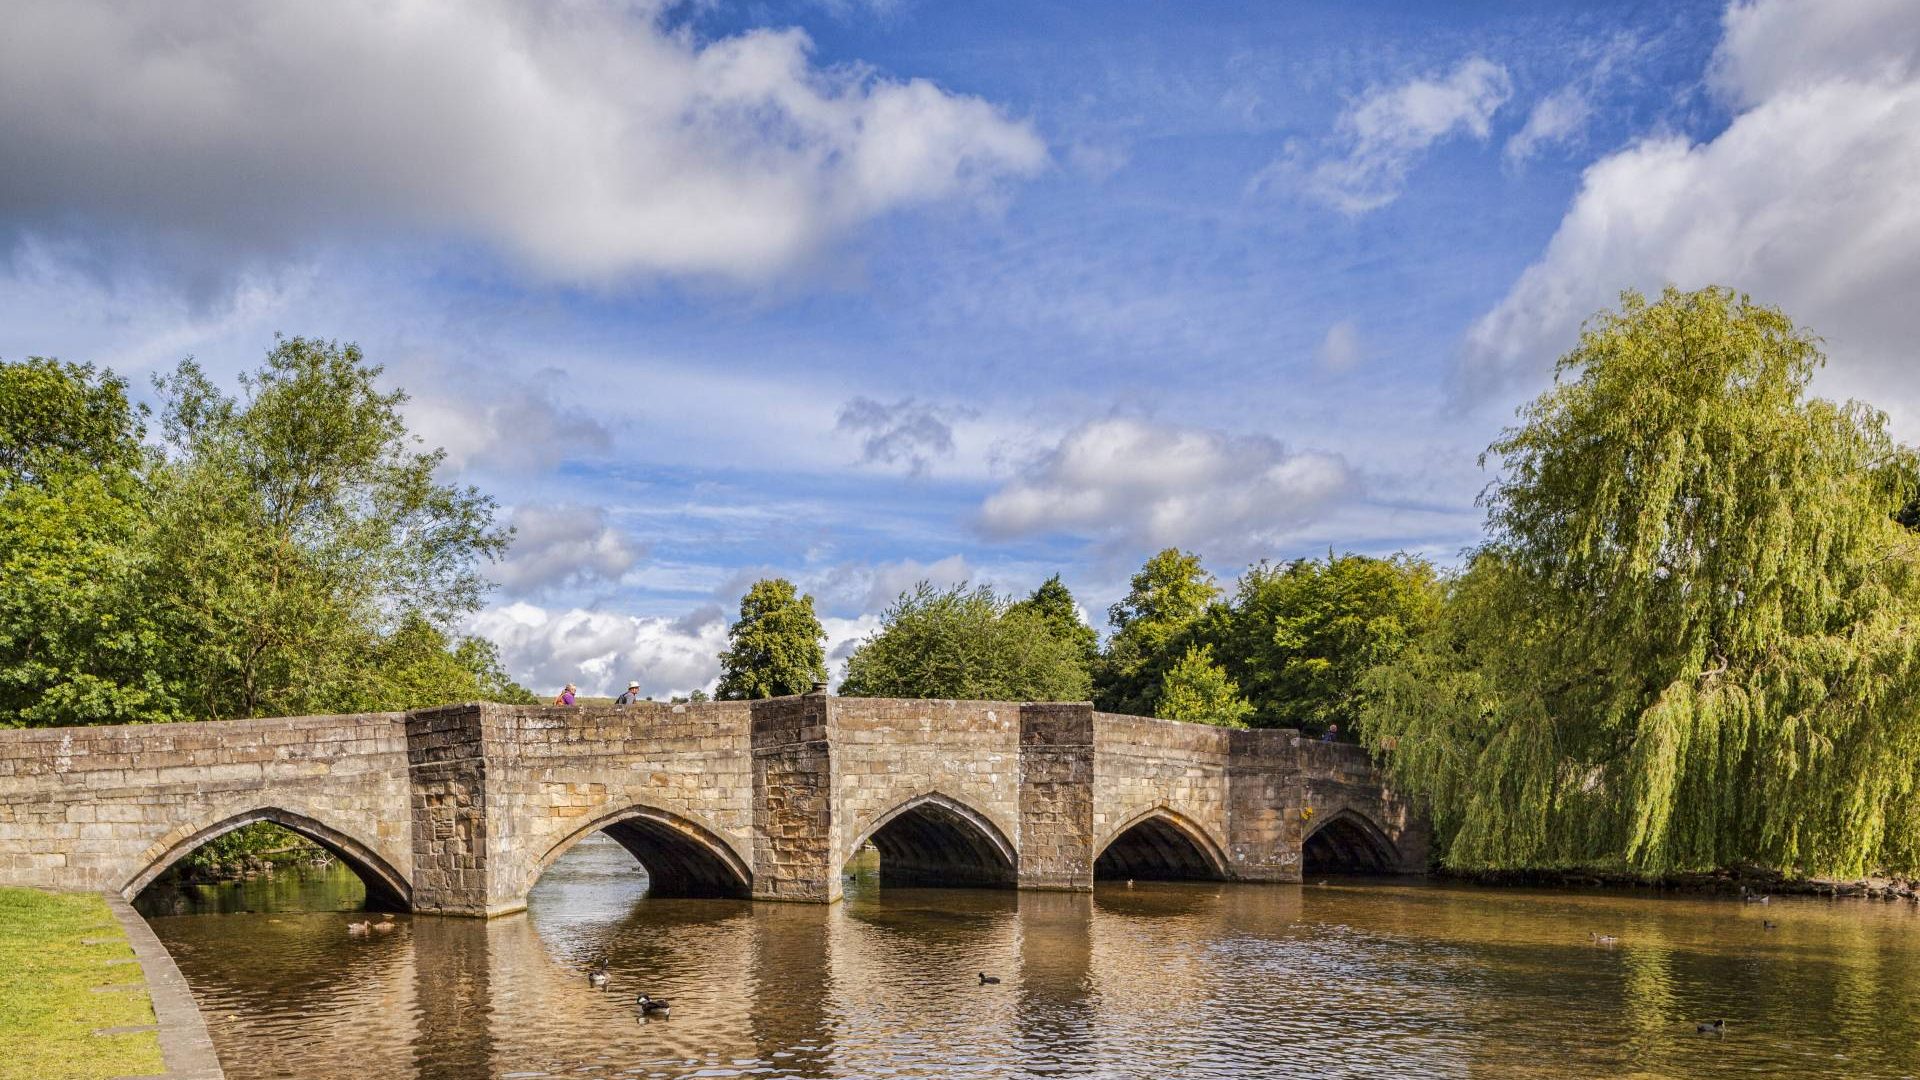 The bridge at Bakewell spanning the River Wye in the summer